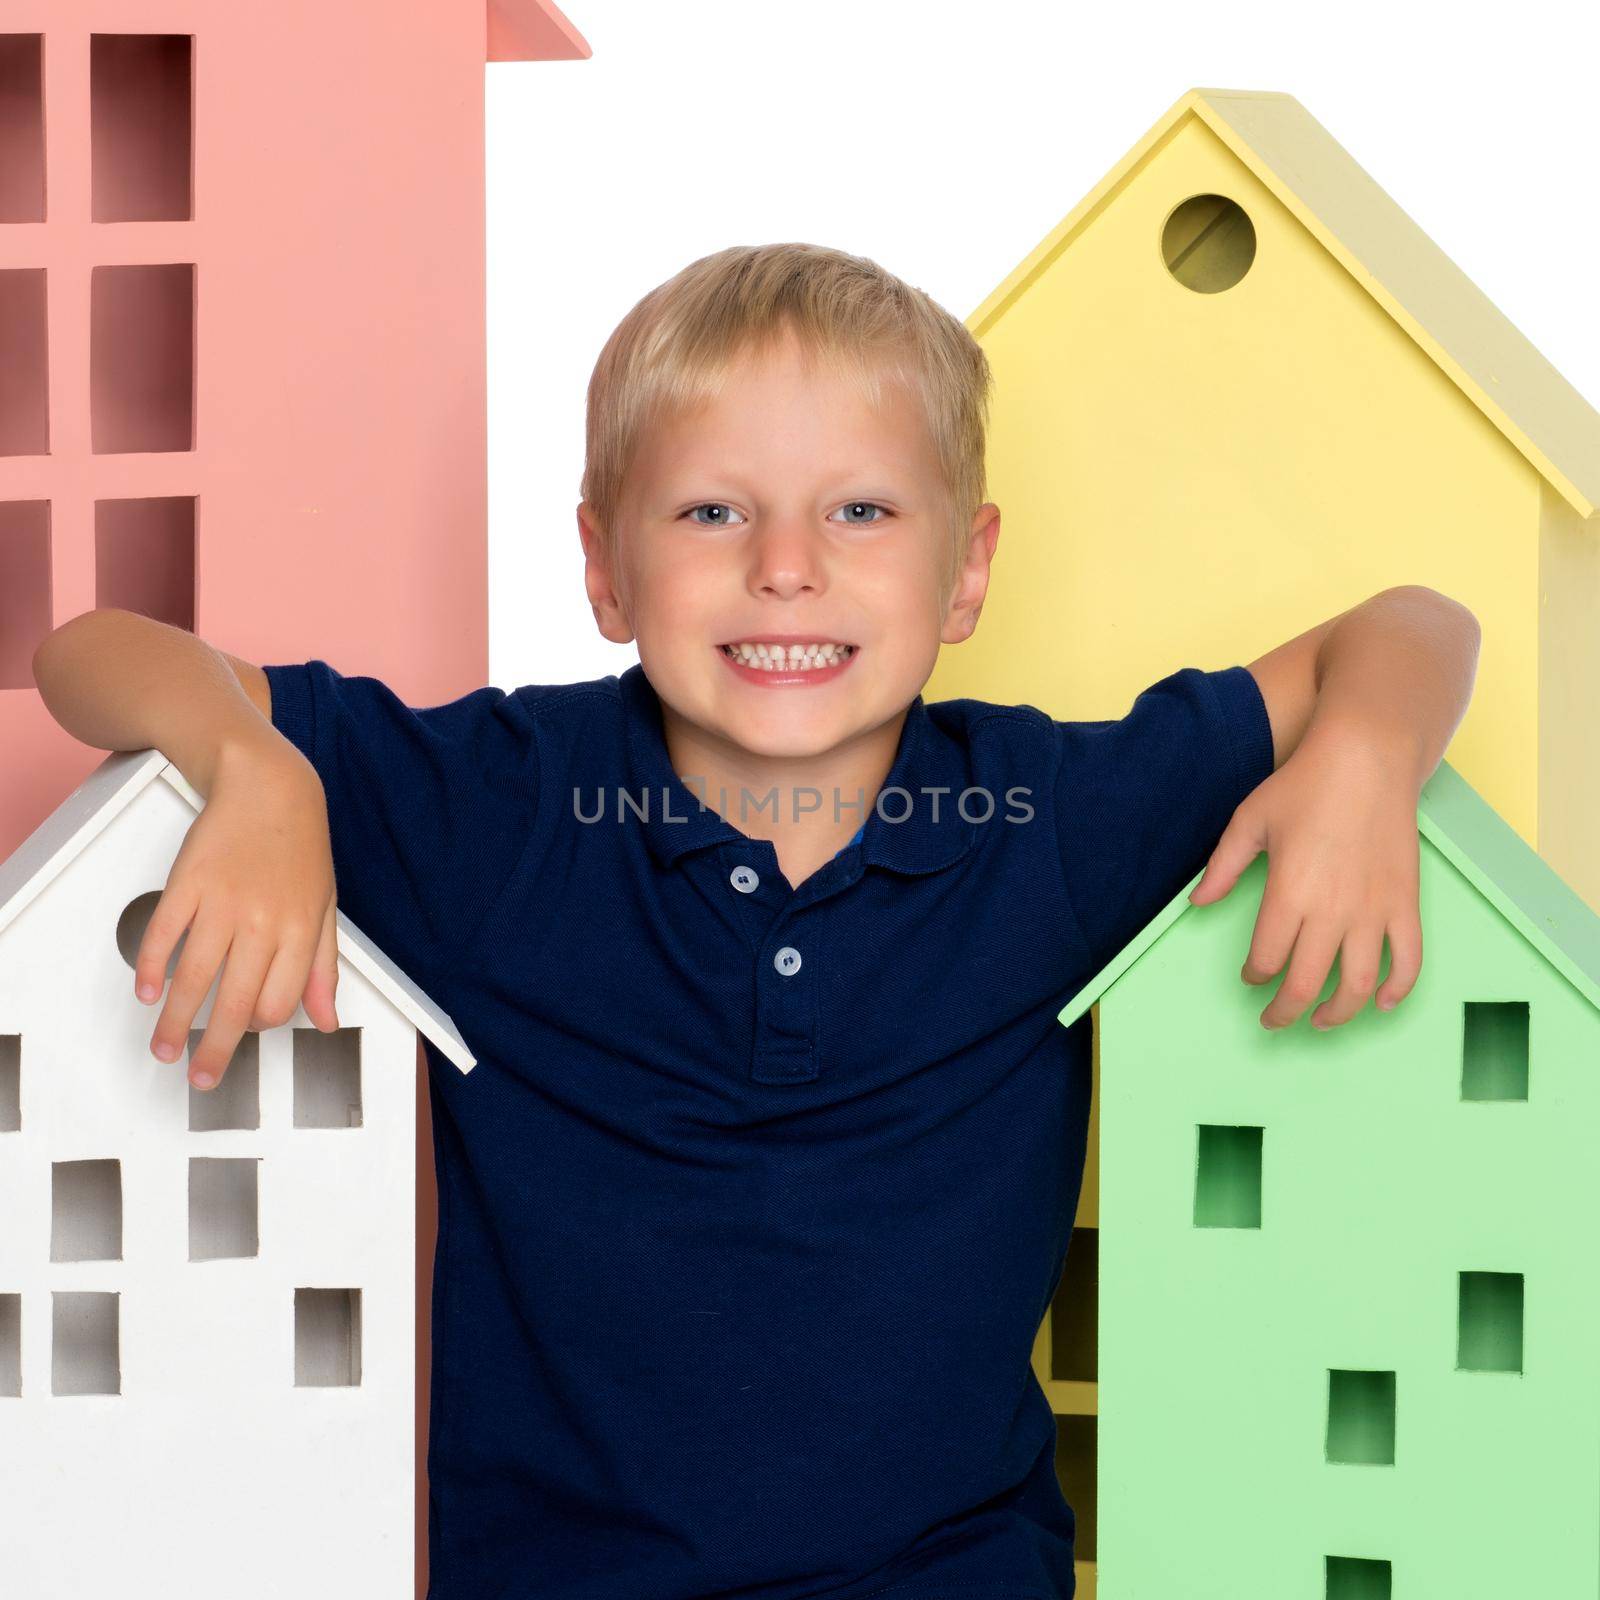 A little boy is playing with colorful houses. by kolesnikov_studio